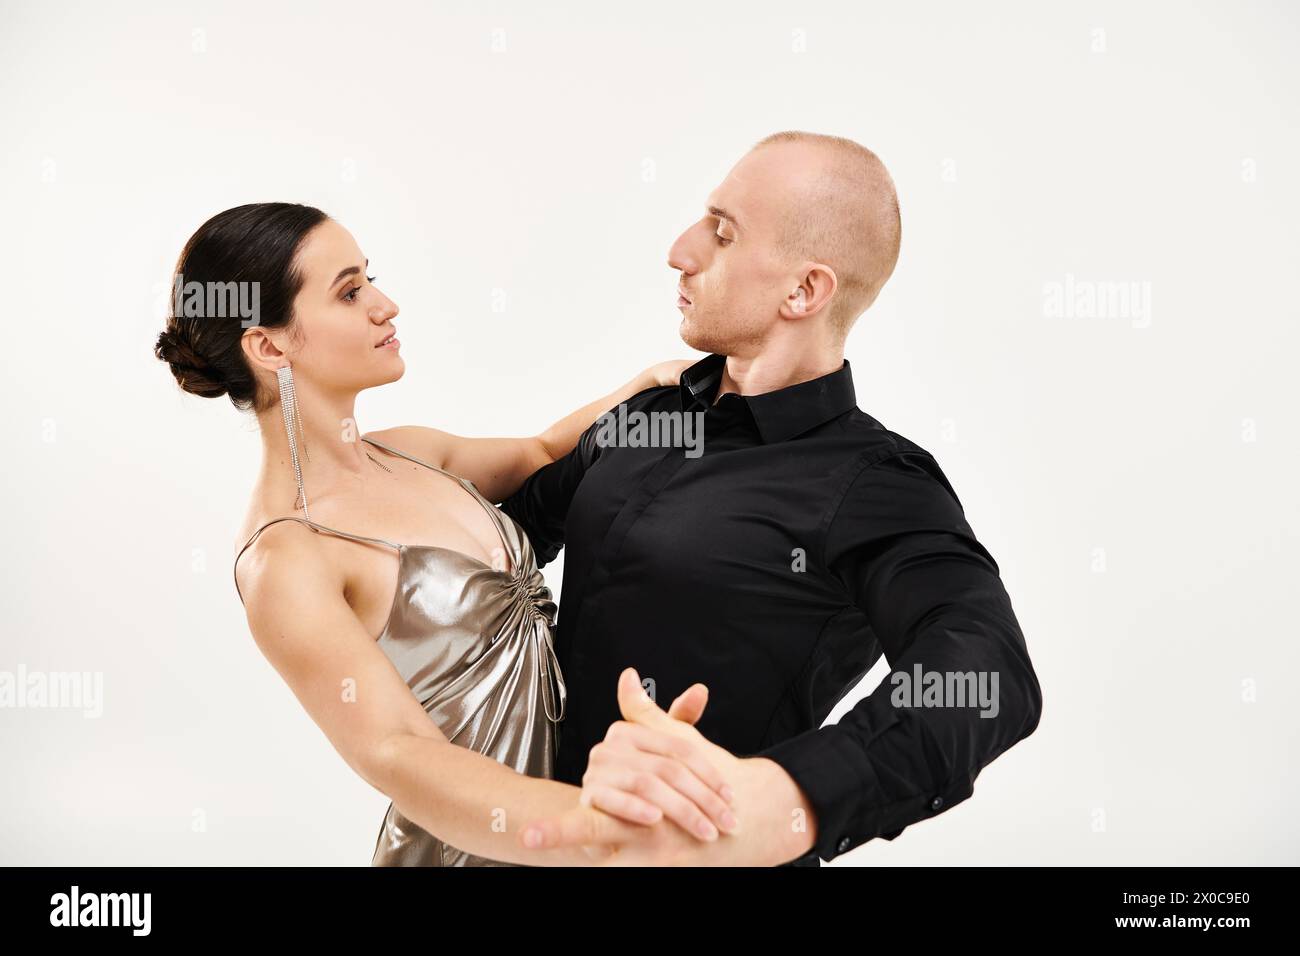 A young man in black and a young woman in a shiny dress dance together in a studio setting with a white background. Stock Photo